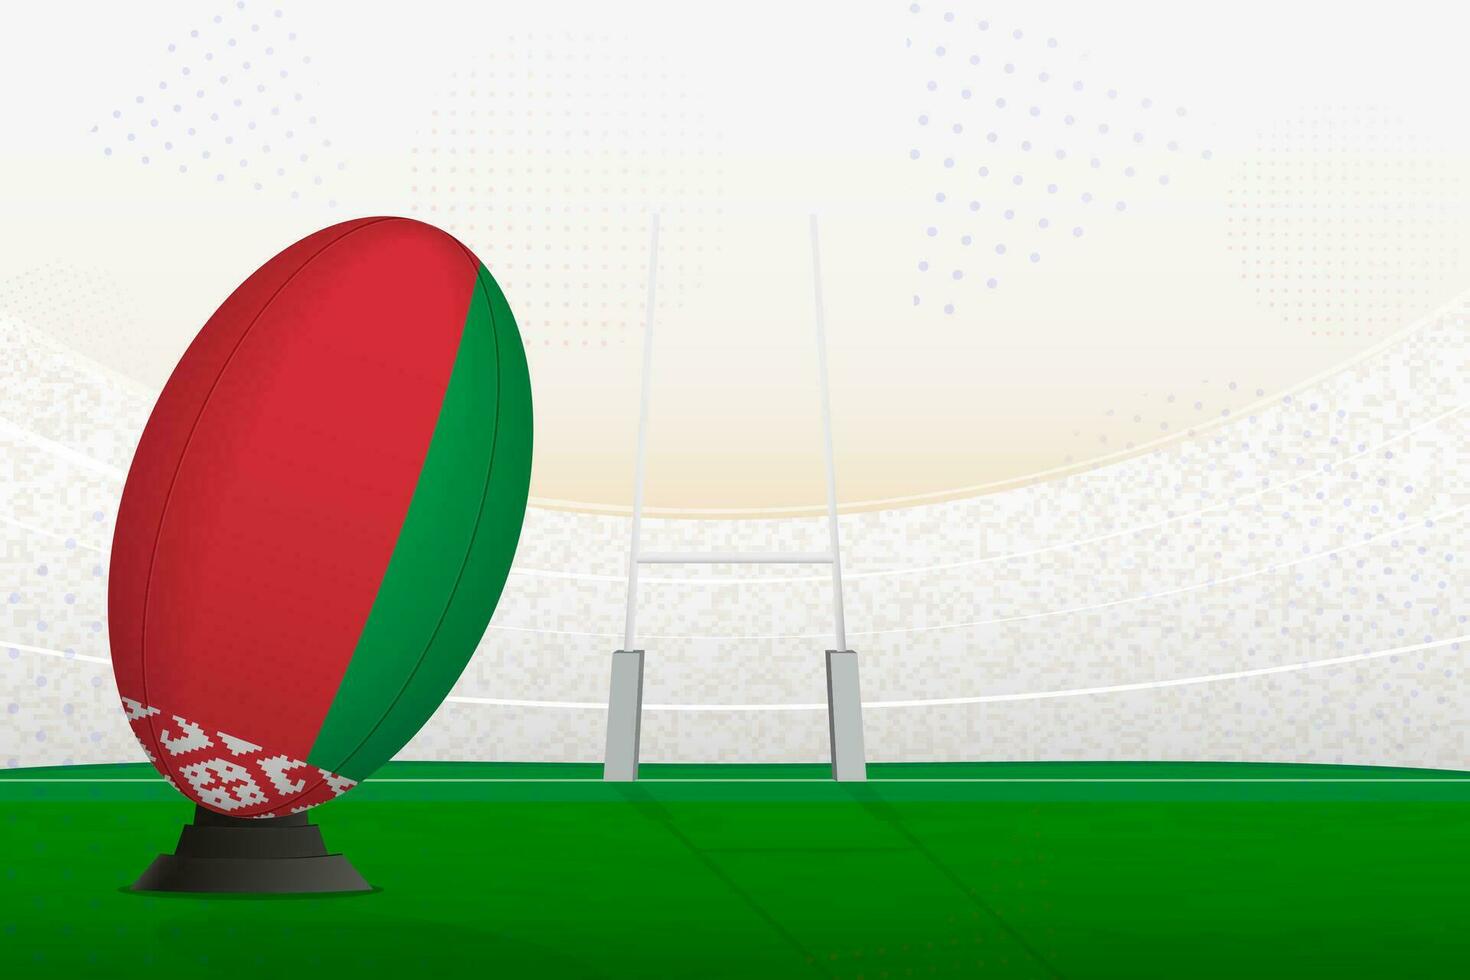 Belarus national team rugby ball on rugby stadium and goal posts, preparing for a penalty or free kick. vector